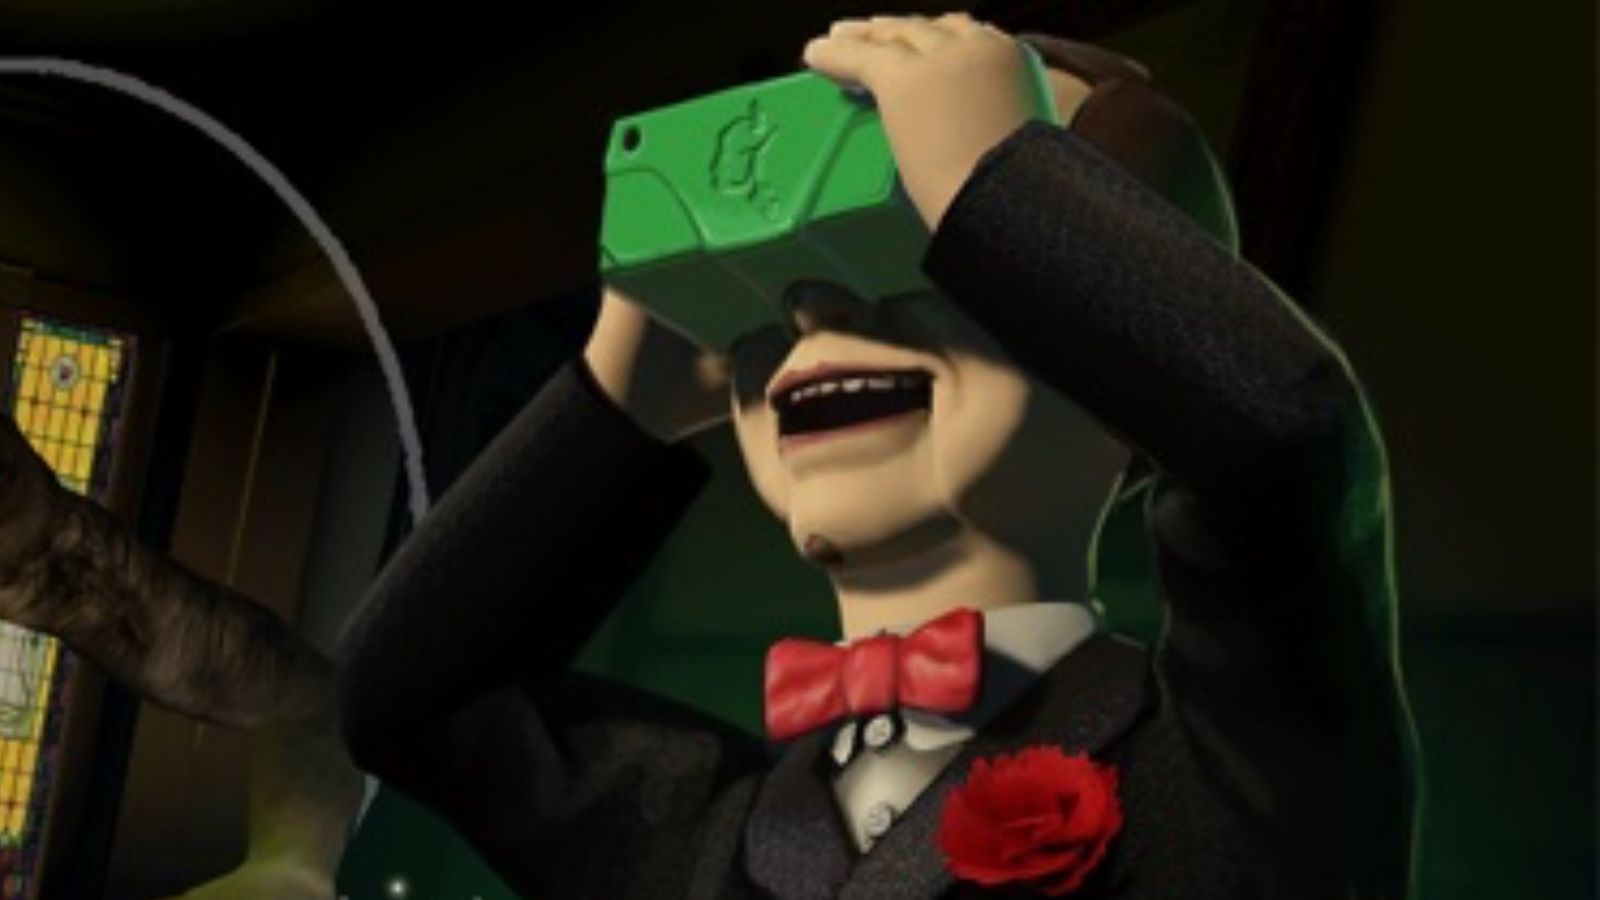 Screenshot from Goosebumps, showing Slappy the Doll wearing a VR headset